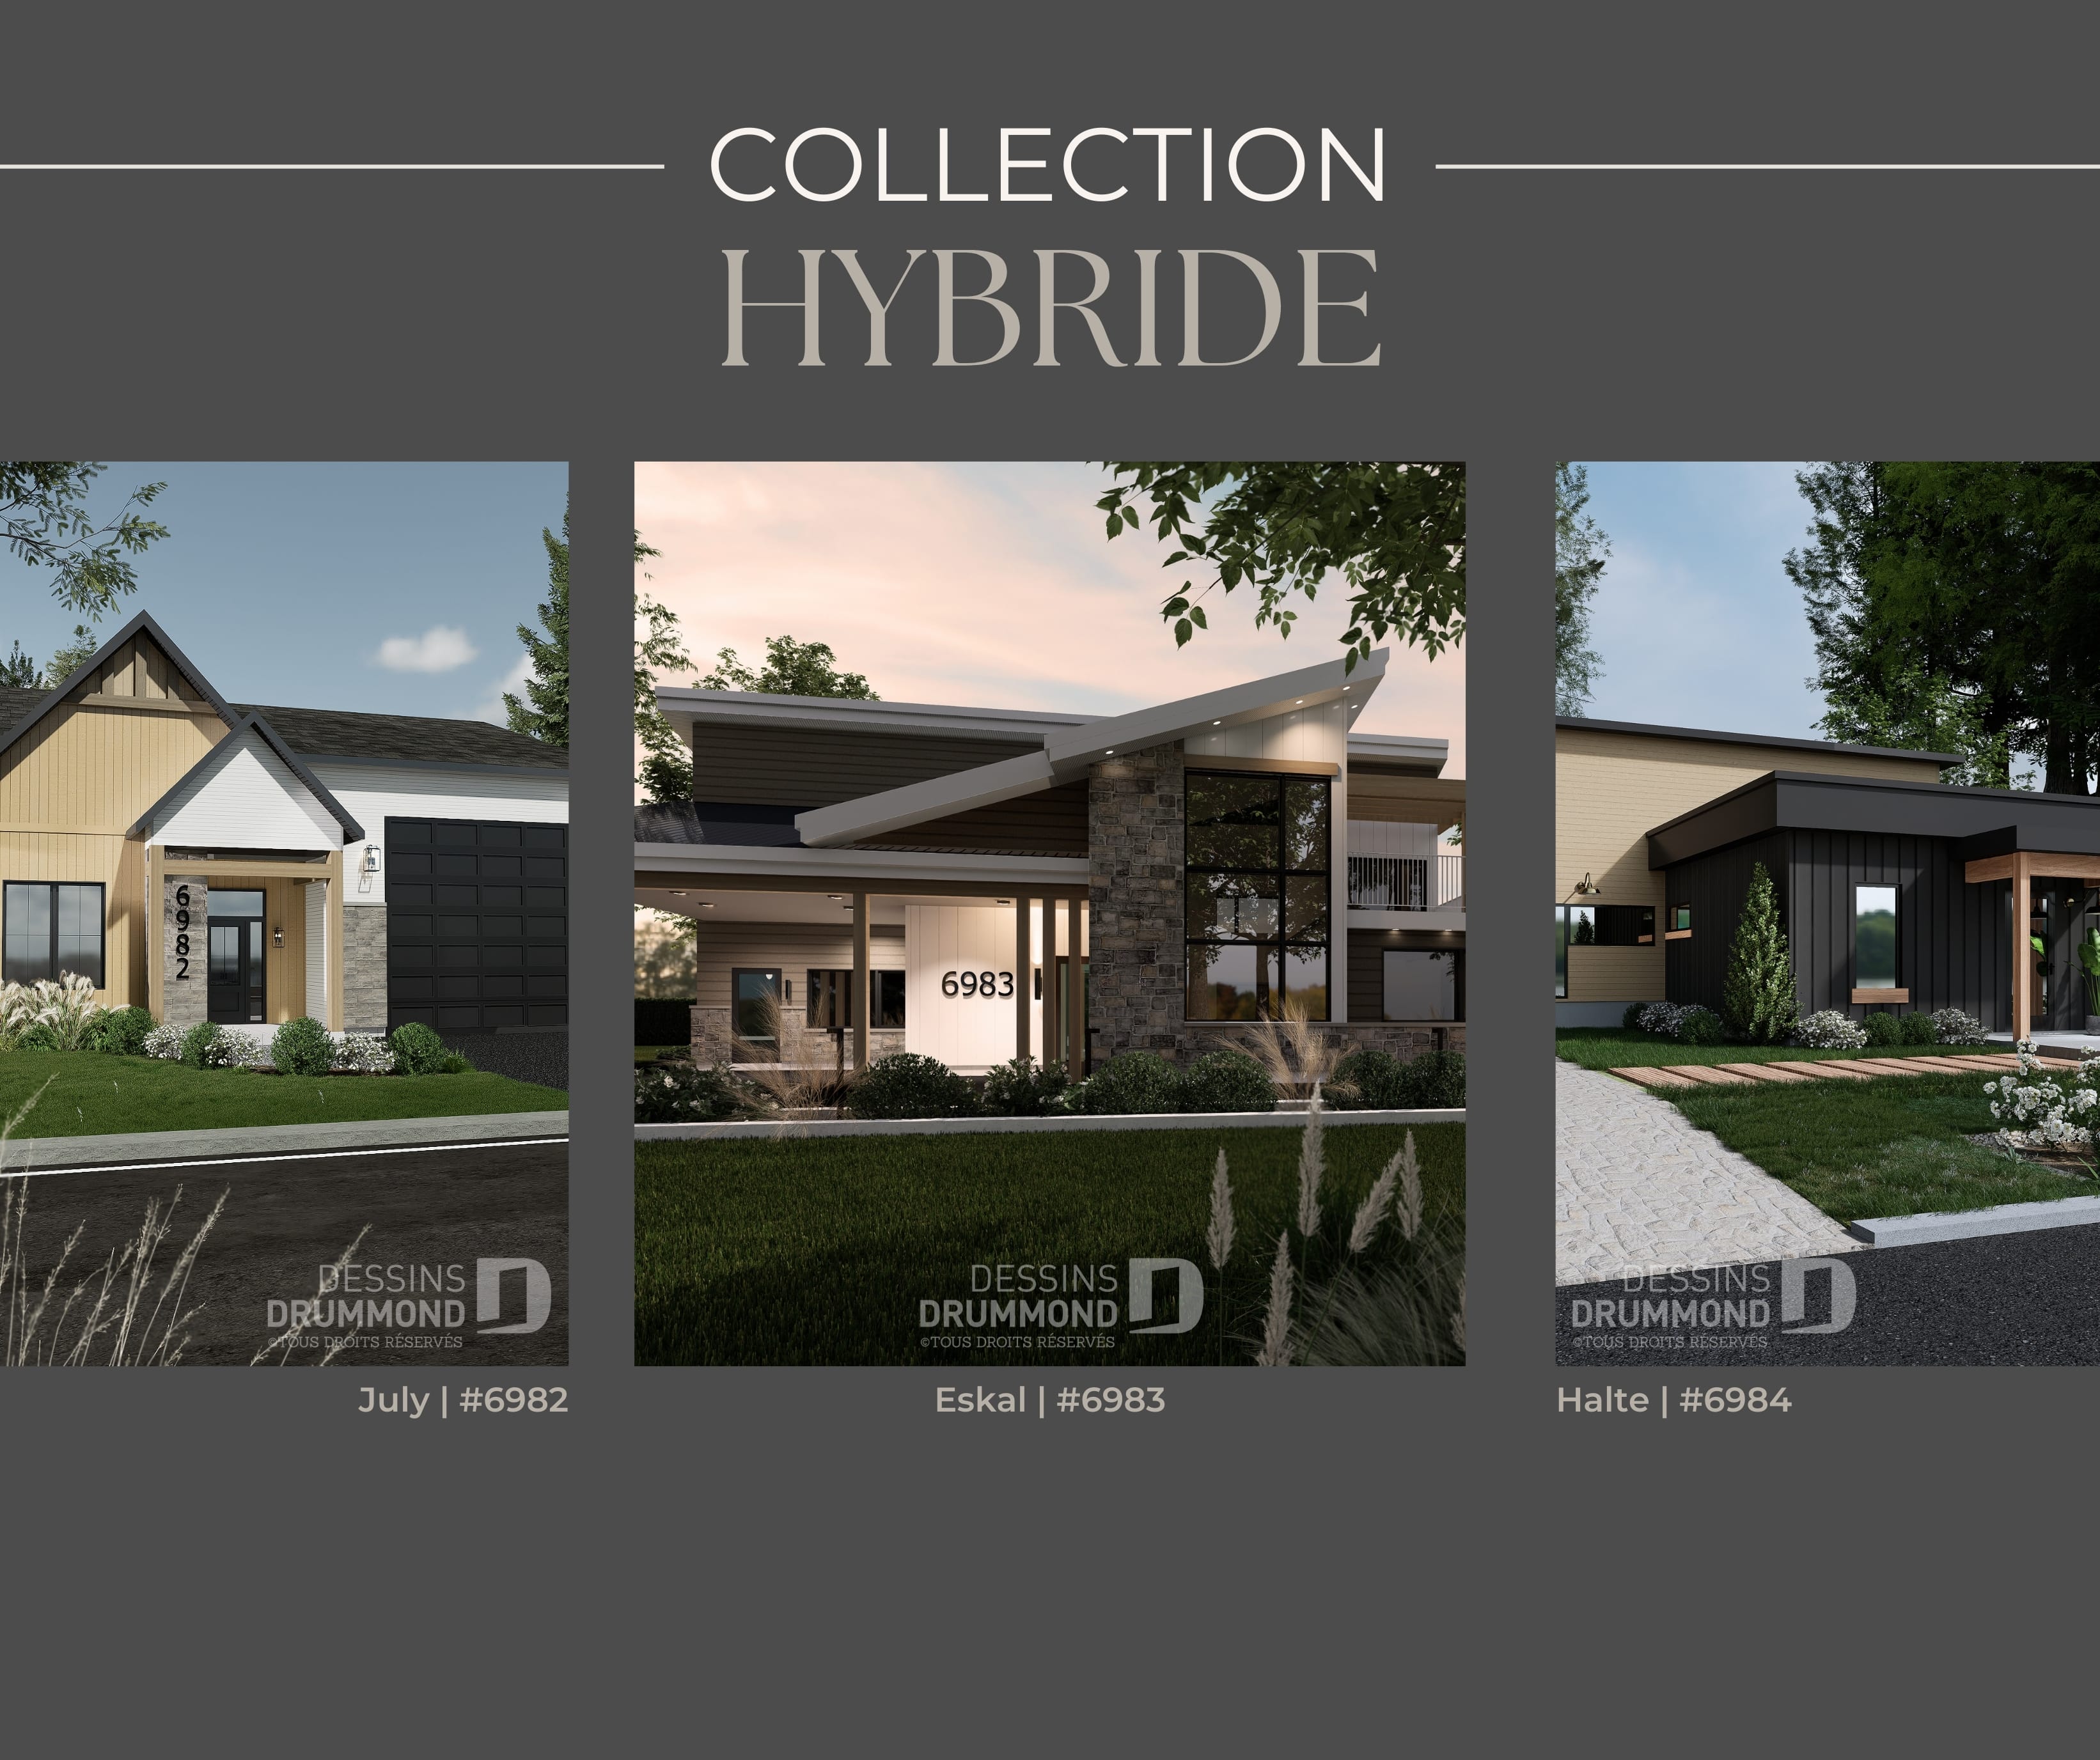 1 - Collection hybride